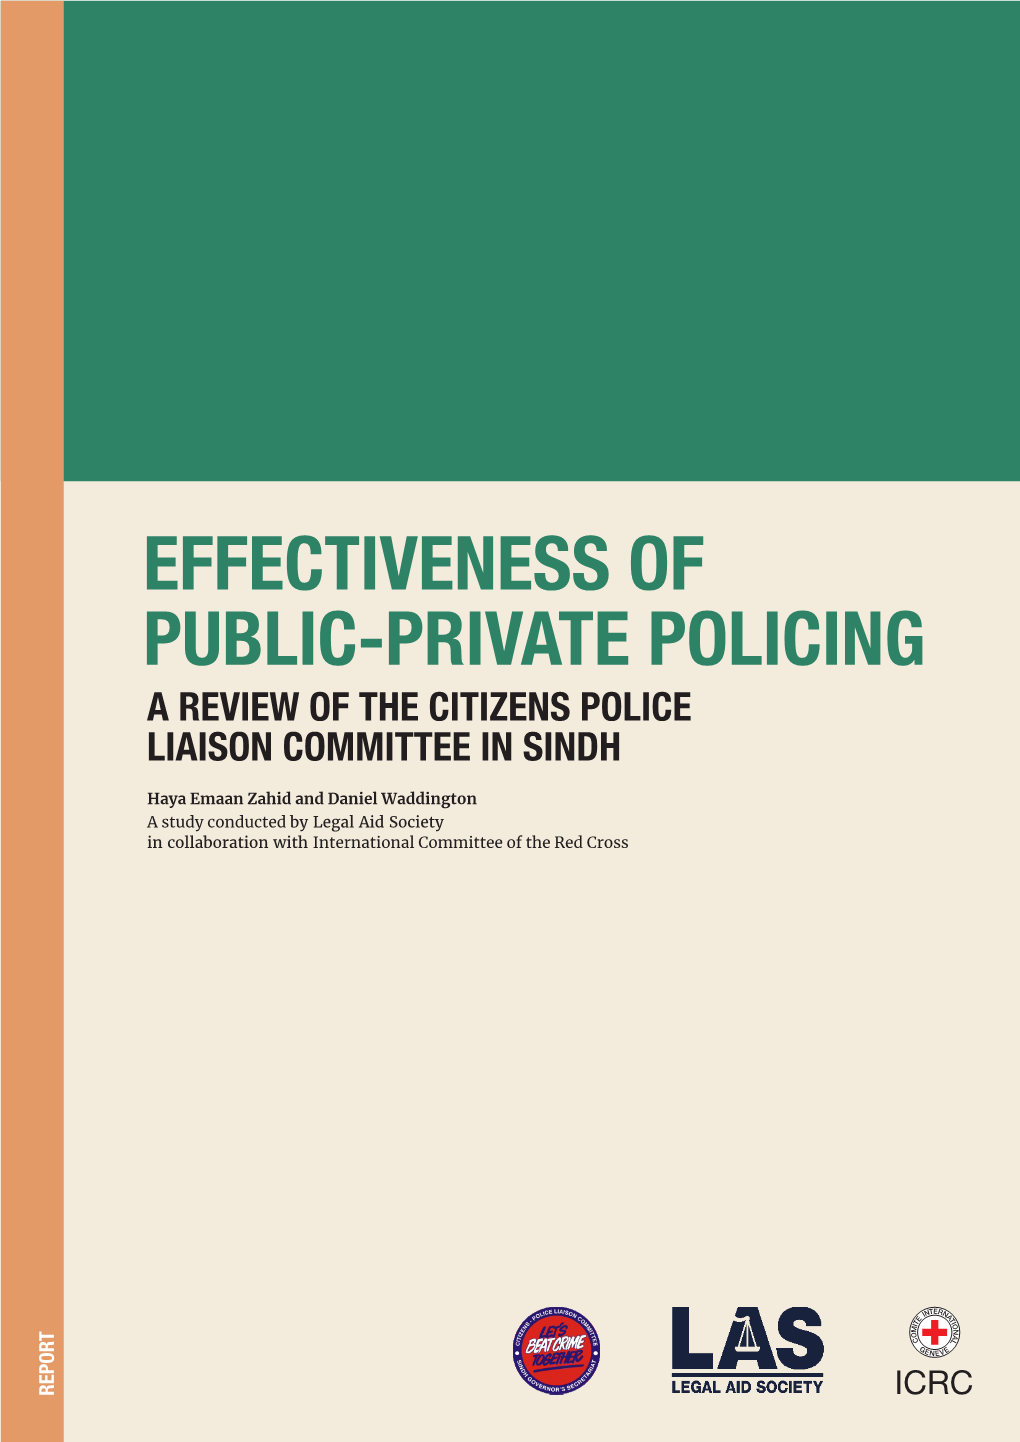 2020 CPLC Report